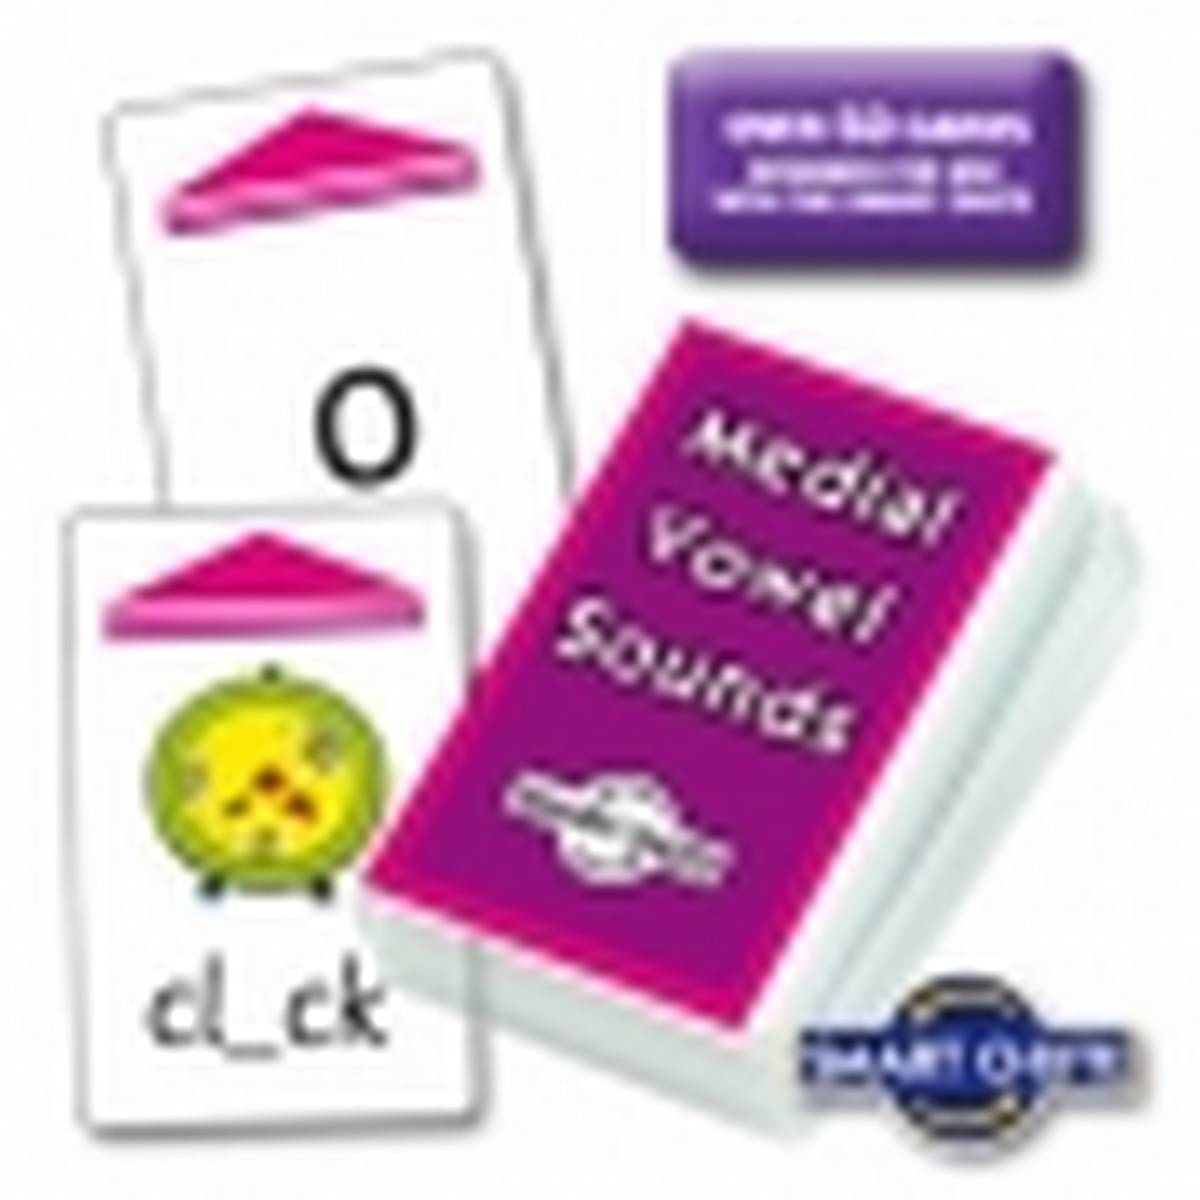 Medial Vowel Sounds Chute Cards